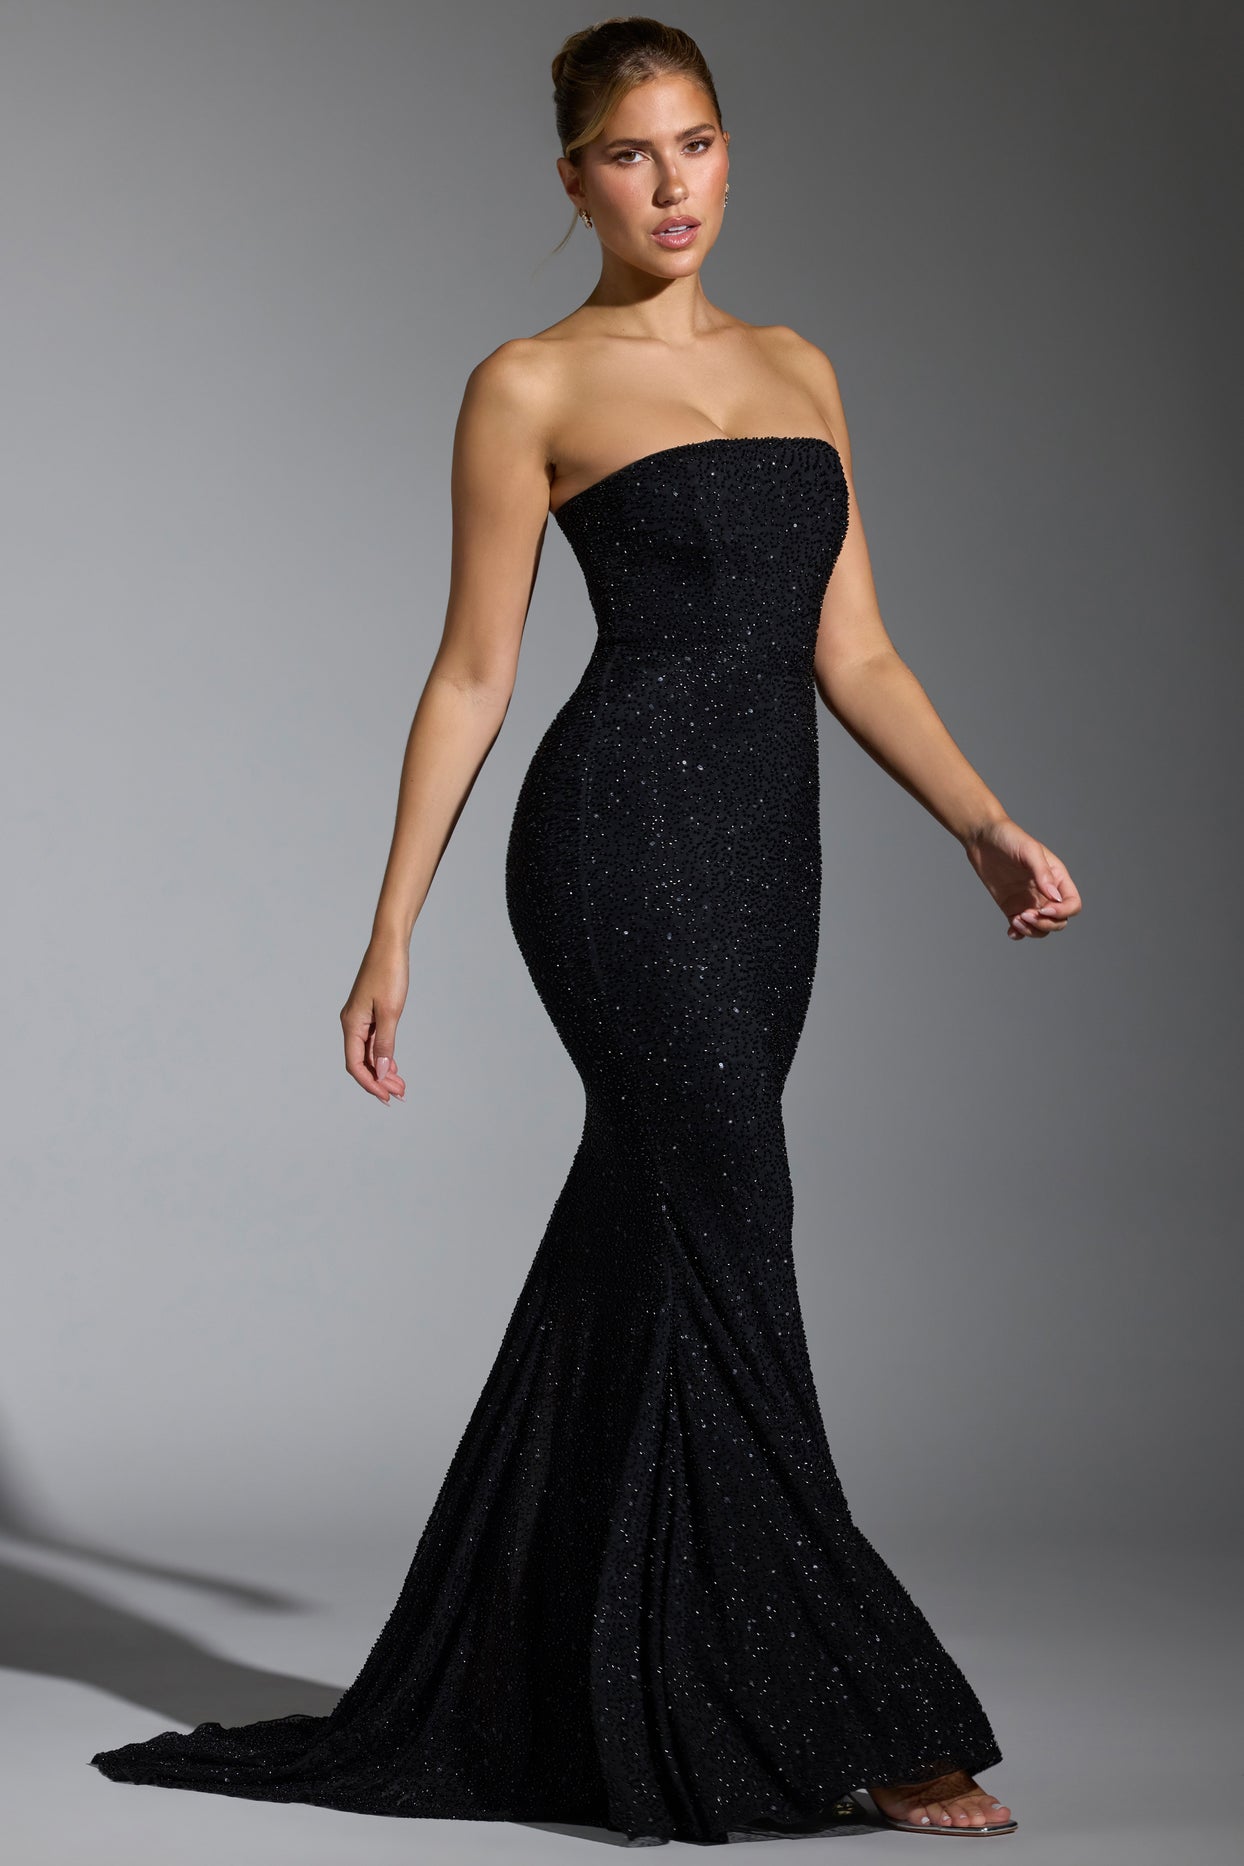 Embellished Corset Gown in Black